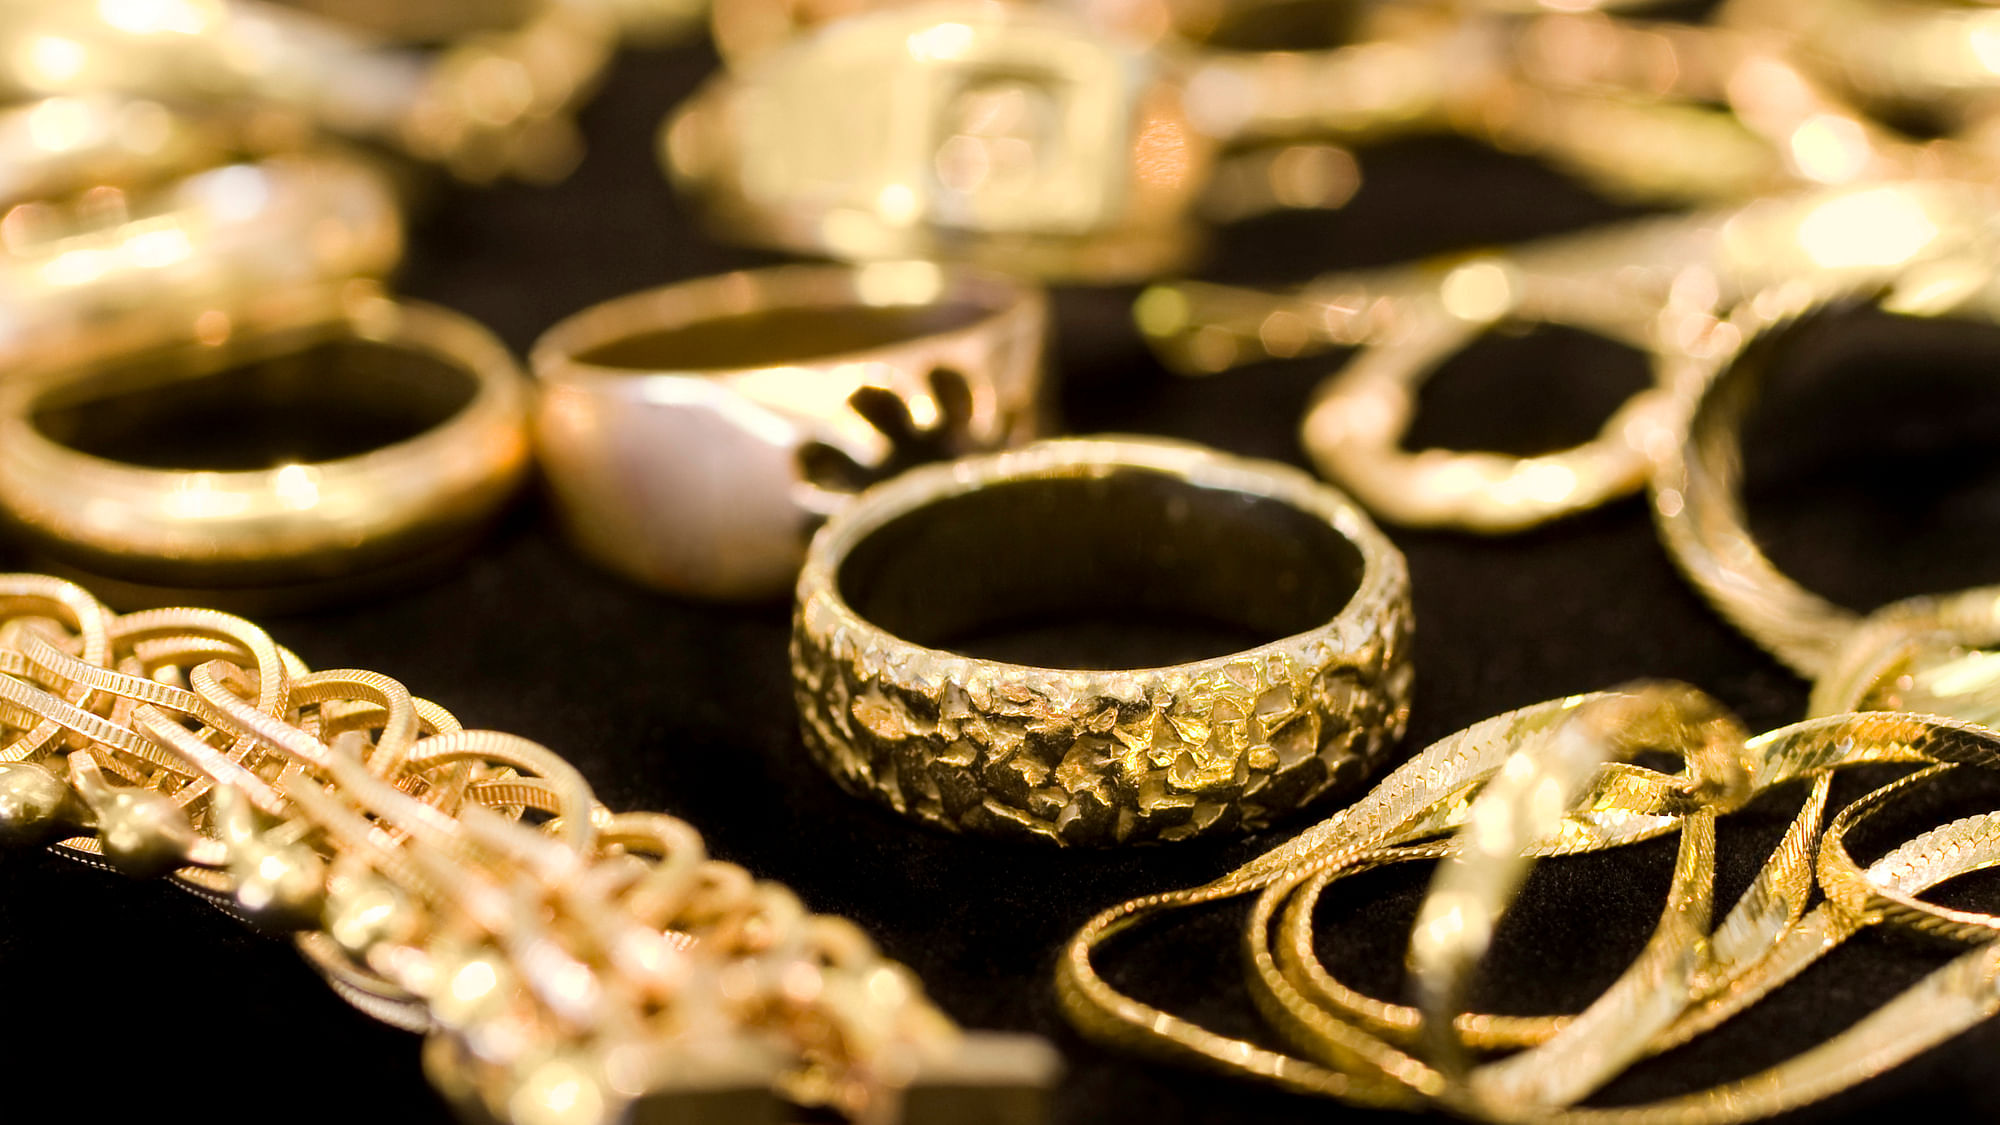 WGC said the gold supply chain will become more transparent and efficient. (Photo: iStockphoto)